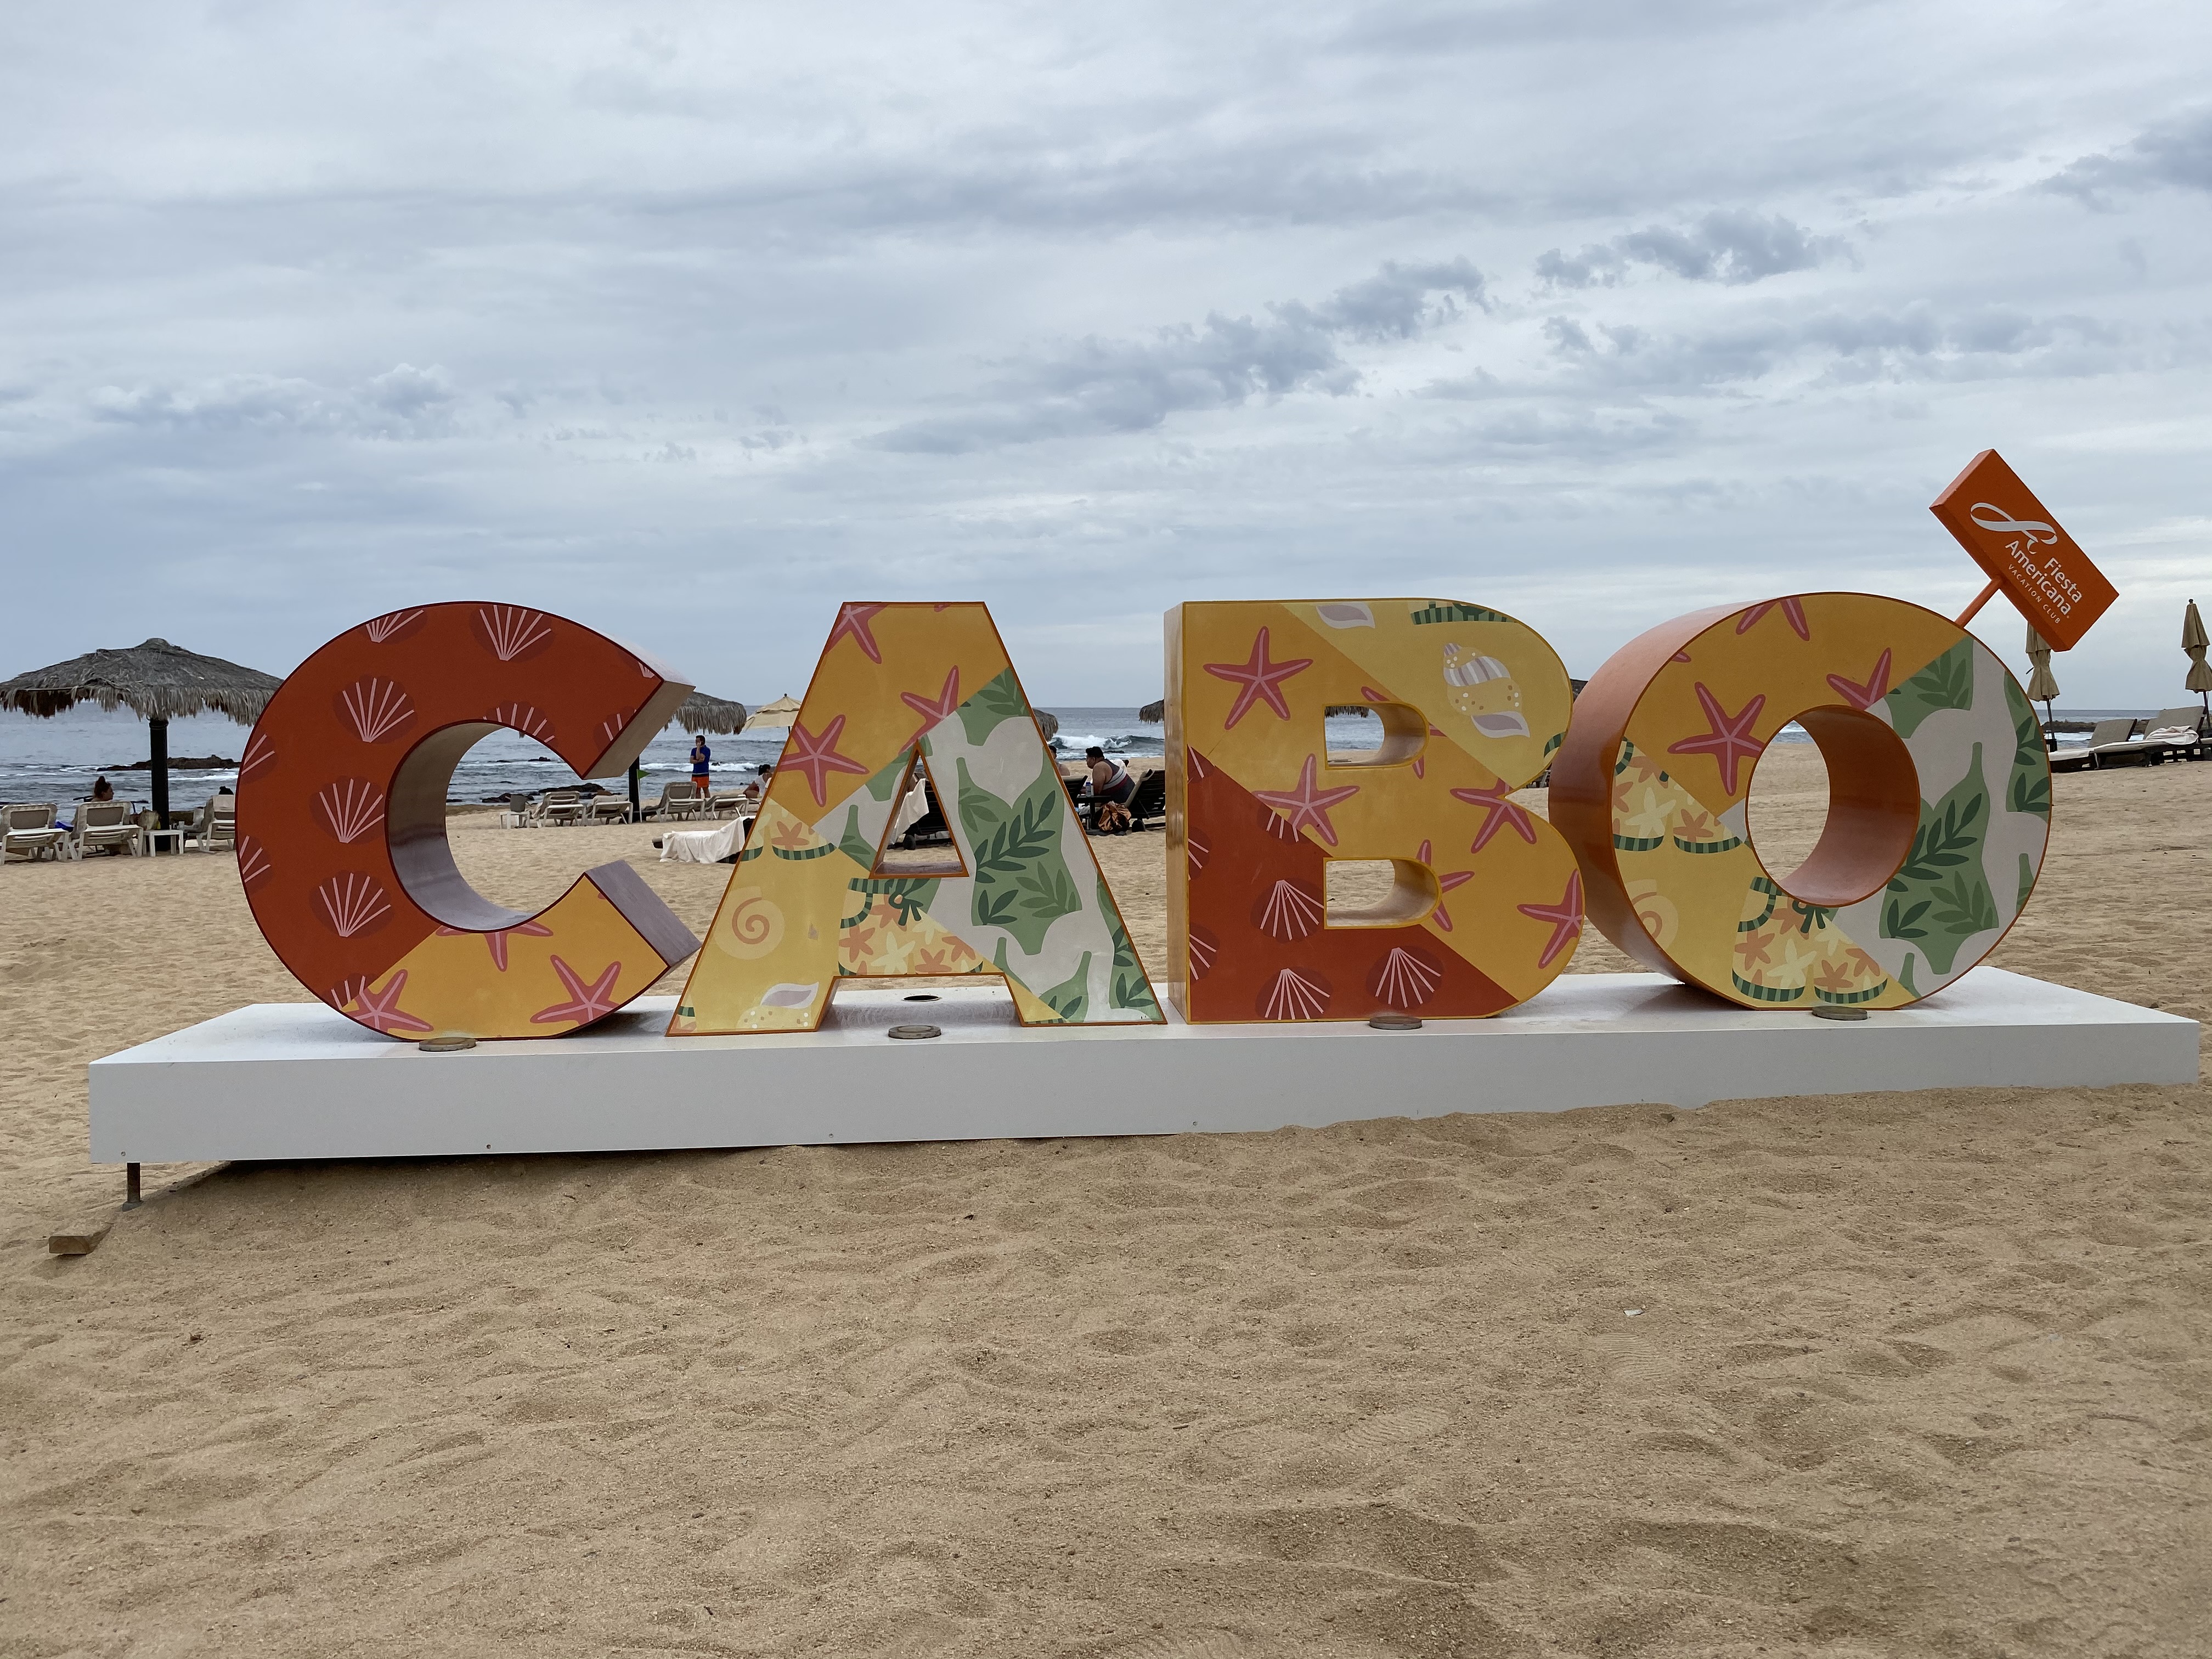 Cabo Sign on the beach